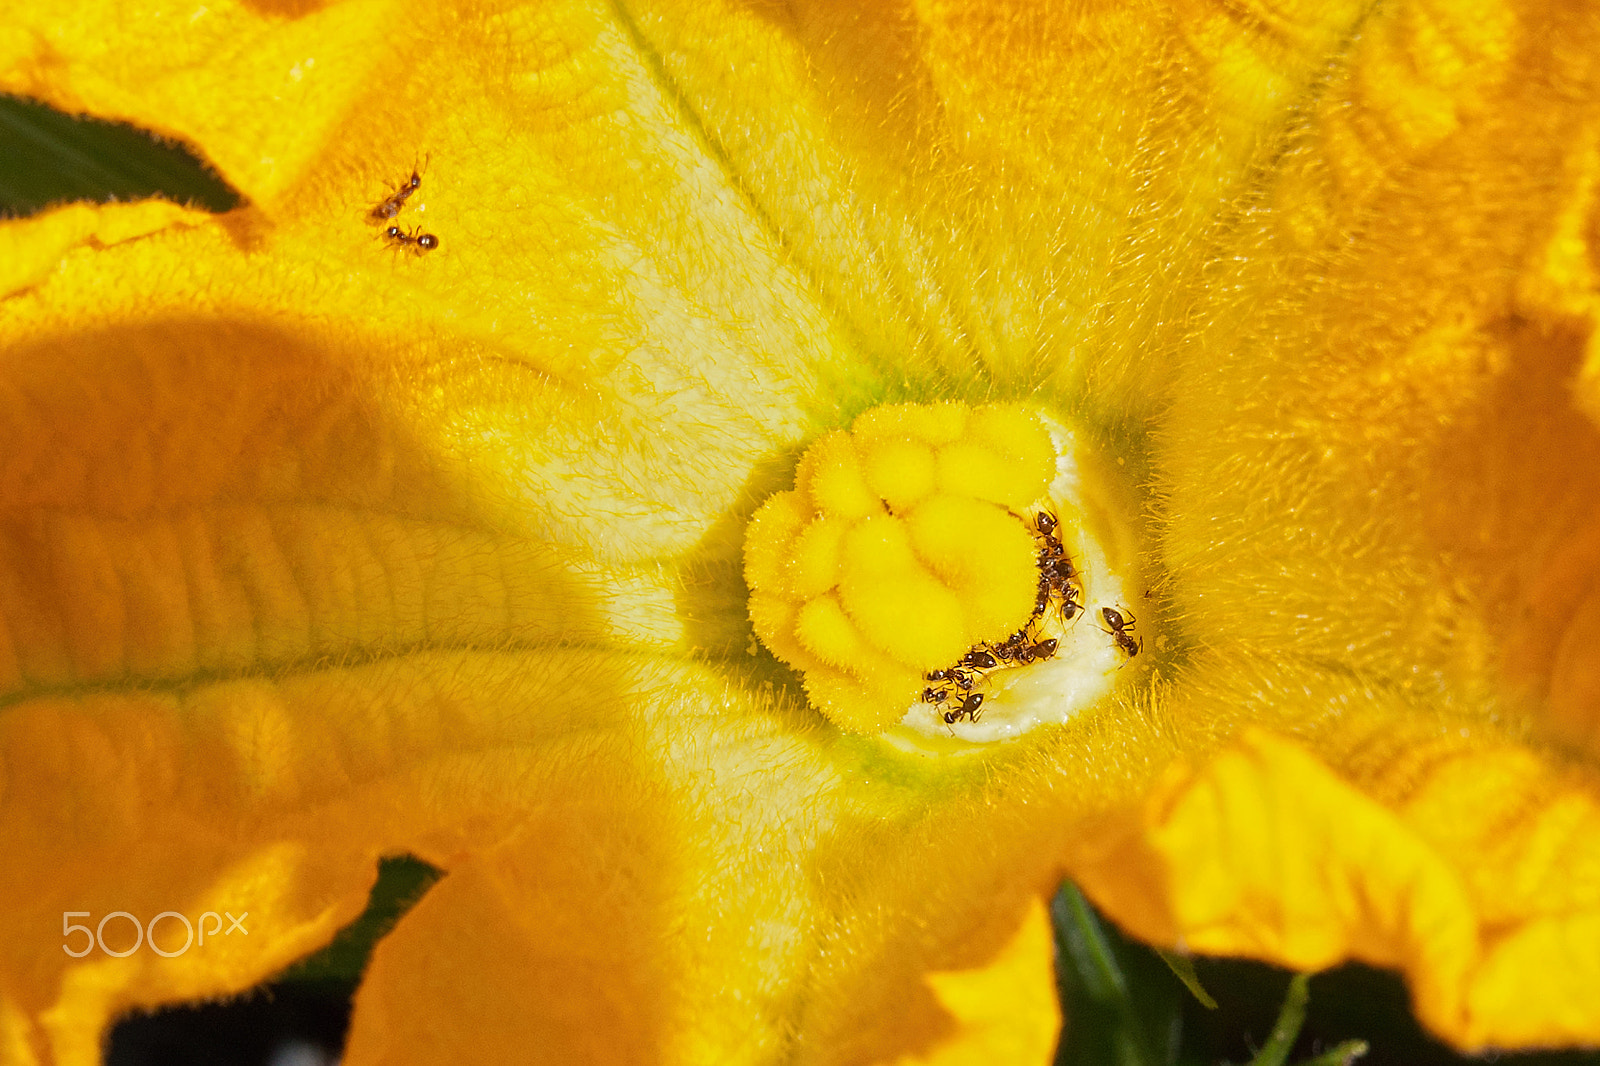 Sony Alpha DSLR-A700 + Tamron 18-270mm F3.5-6.3 Di II PZD sample photo. Ants on a courgette flower, photography